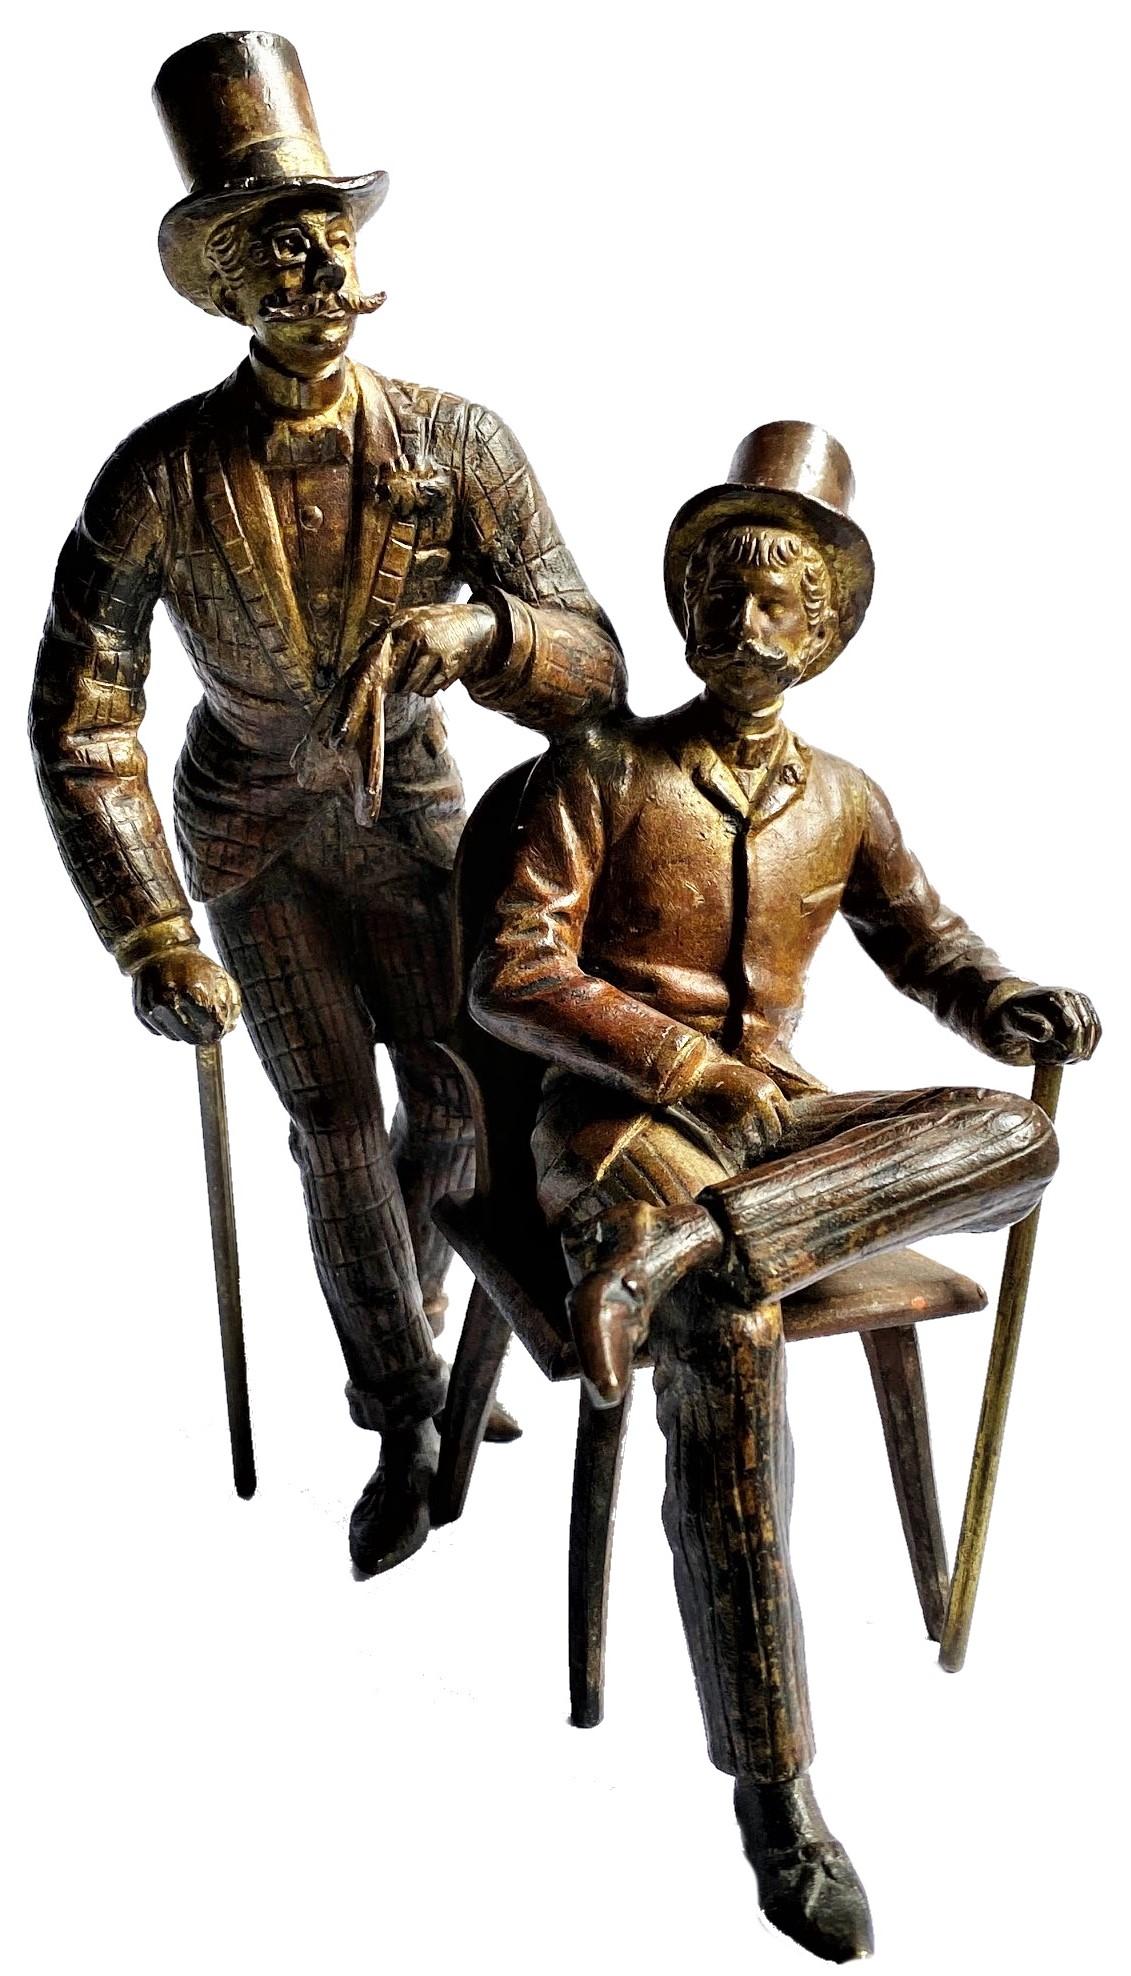 This wonderful, full of humor desk-size sculpture is a real gem for the Viennese cold-painted bronze sculpture collectors. Though created in the best traditions of the world-famous foundry of Franz Xavier Bergman, to whom we are attributing the